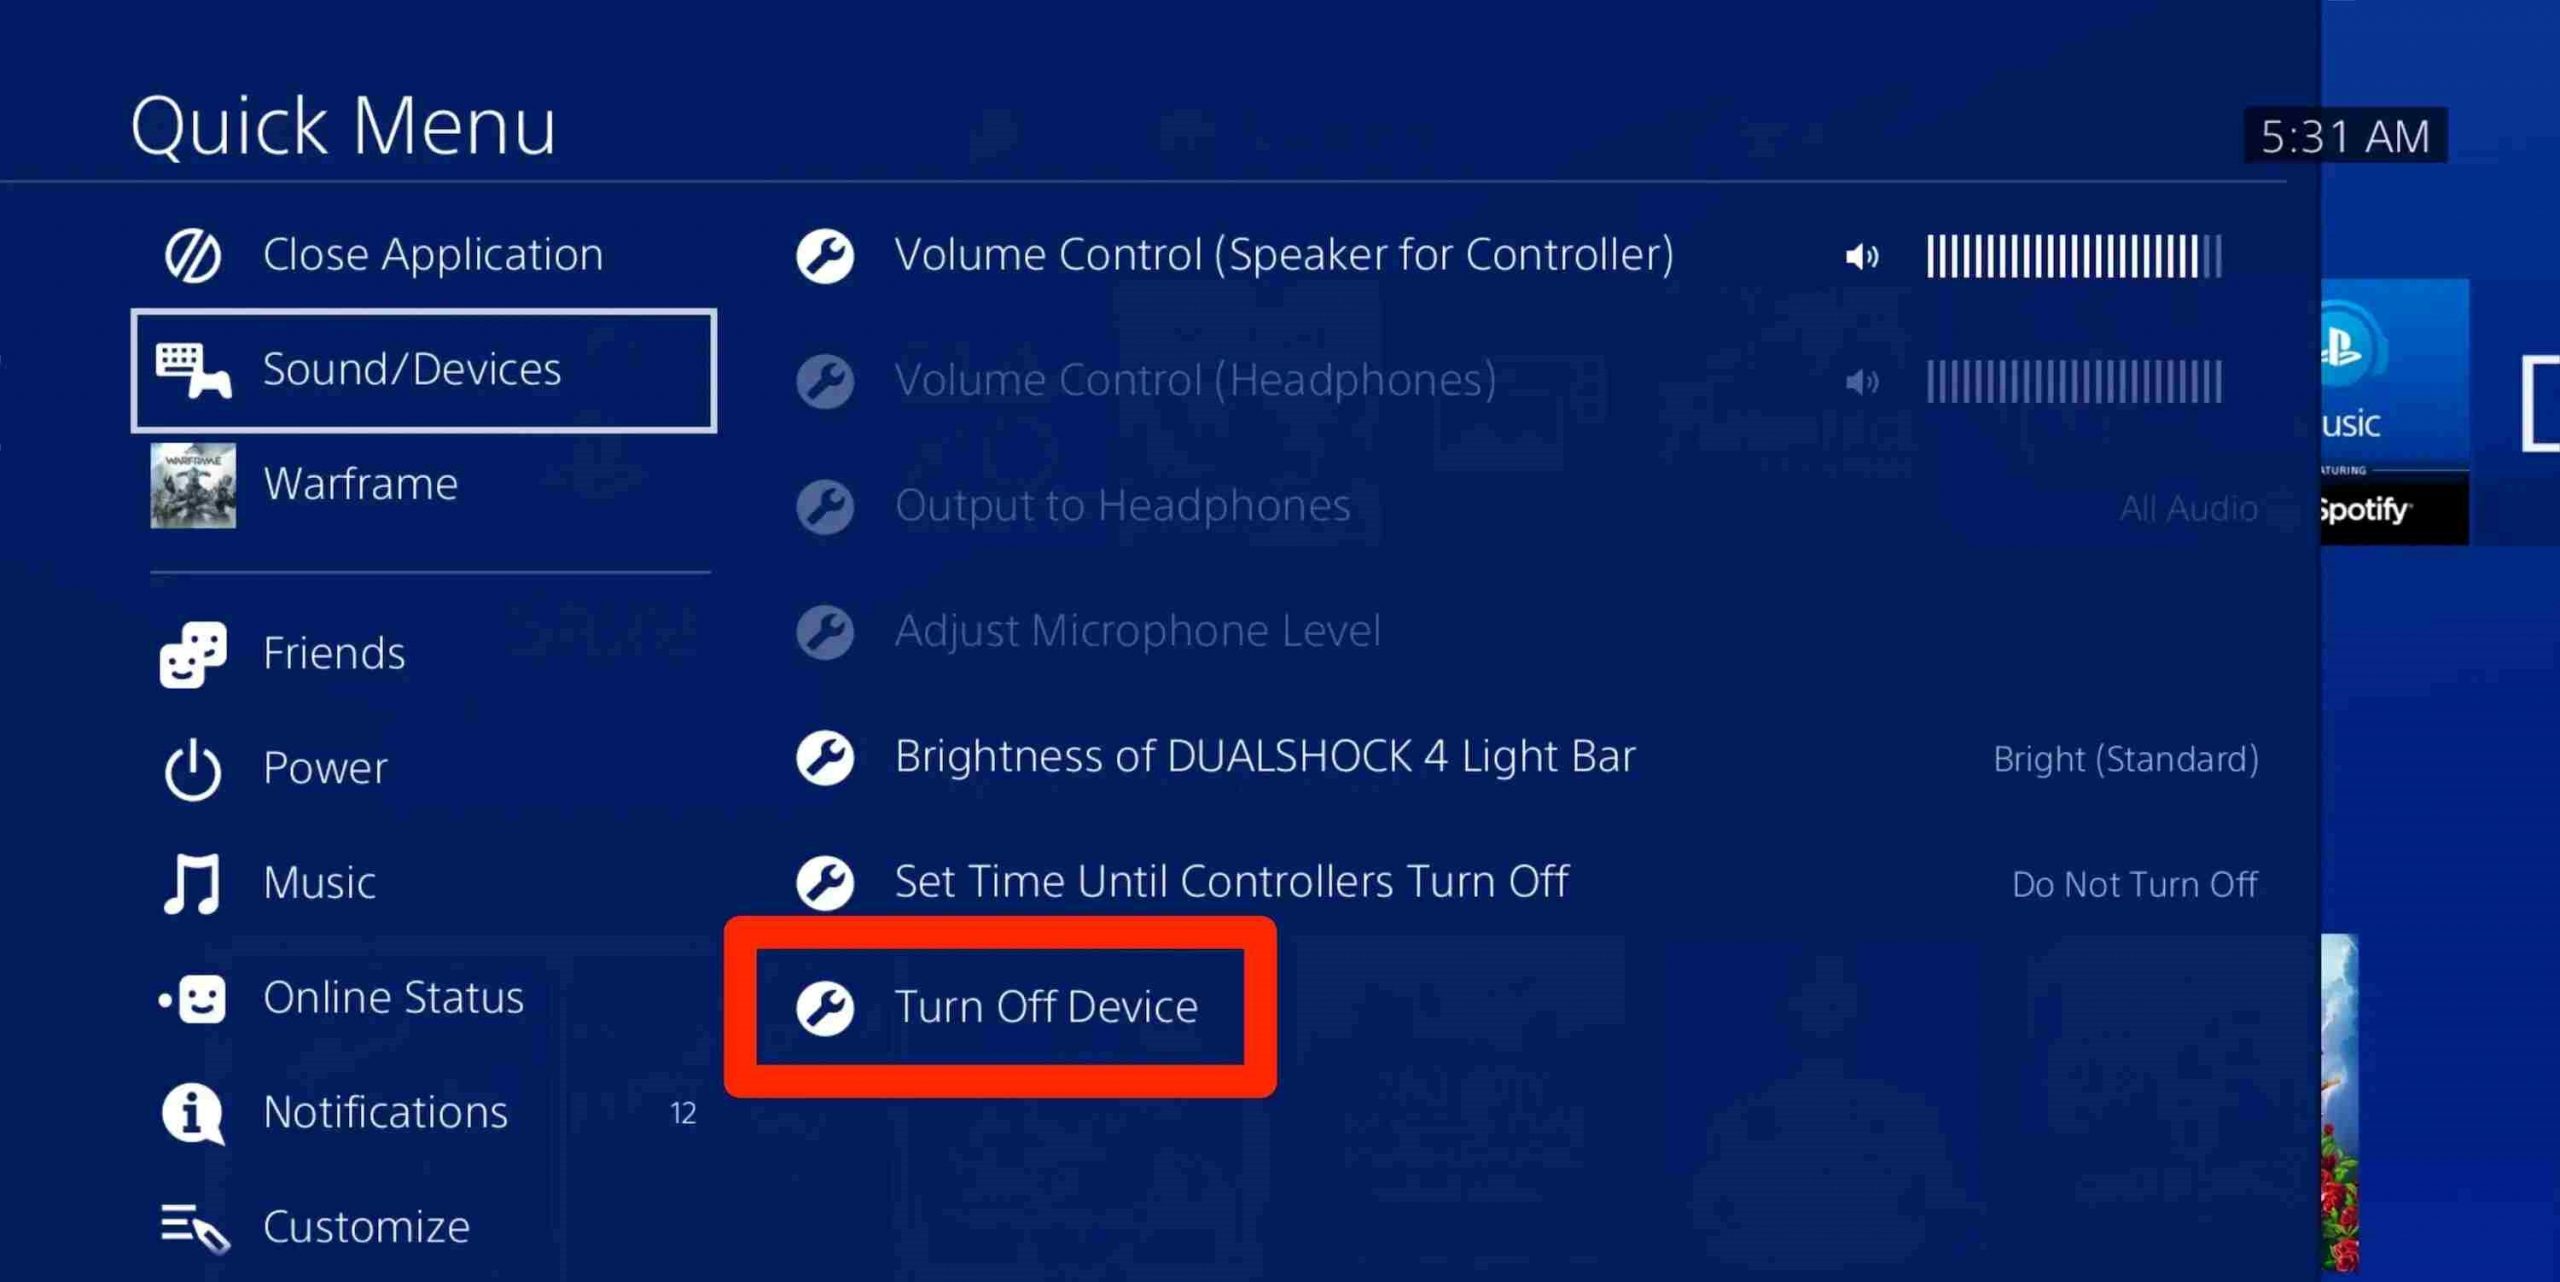 Turn off PS4 controller from Quick menu